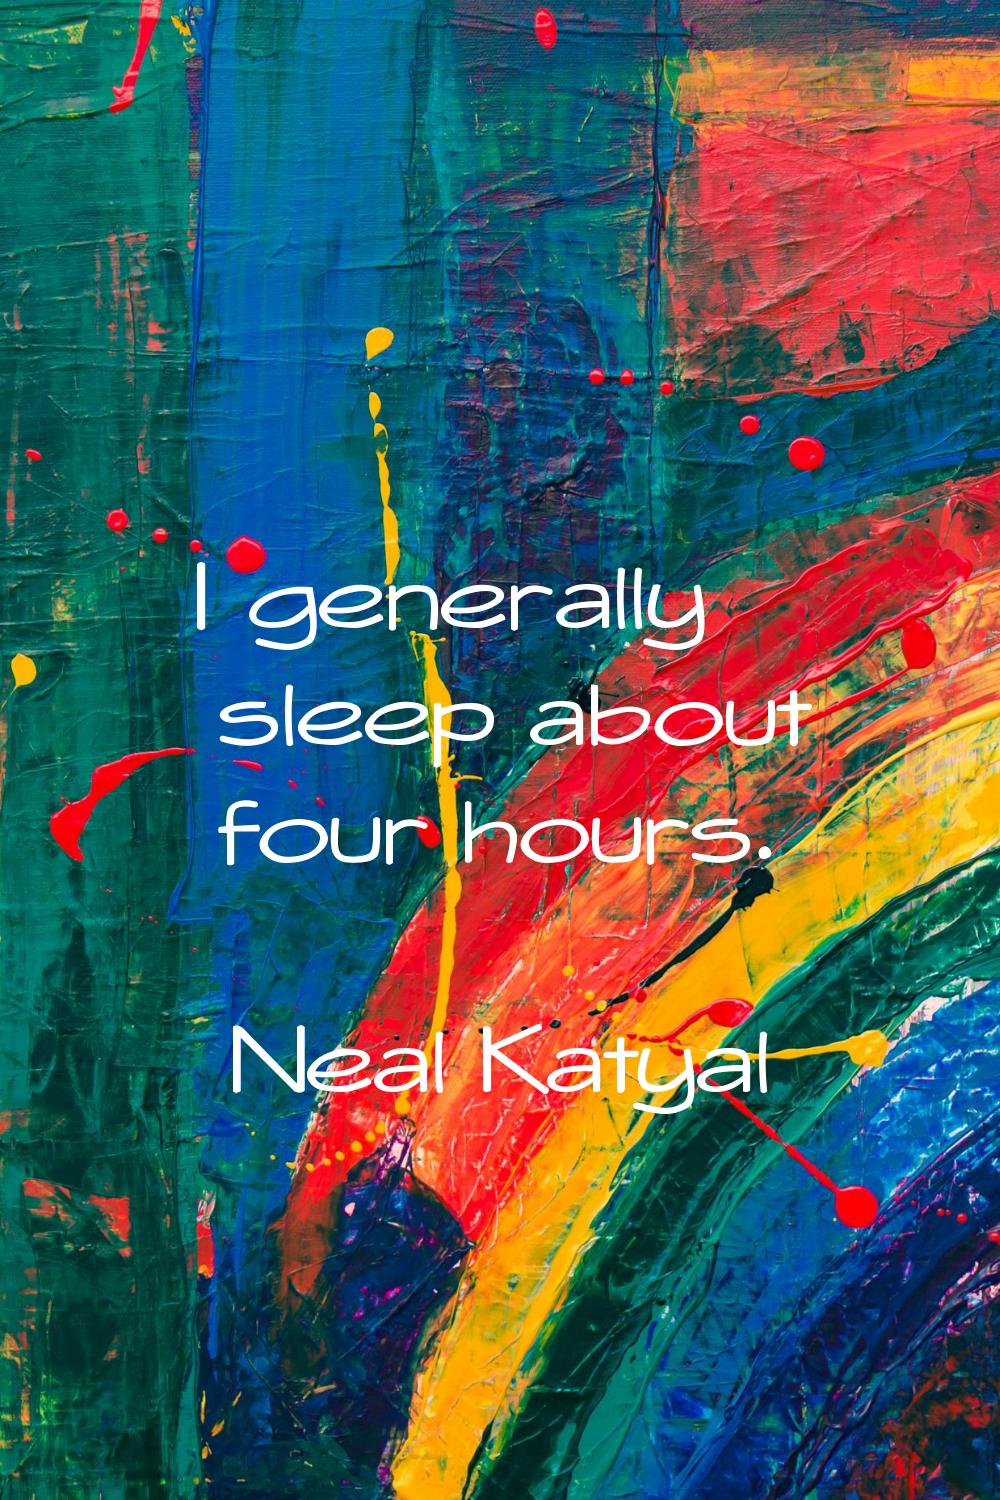 I generally sleep about four hours.